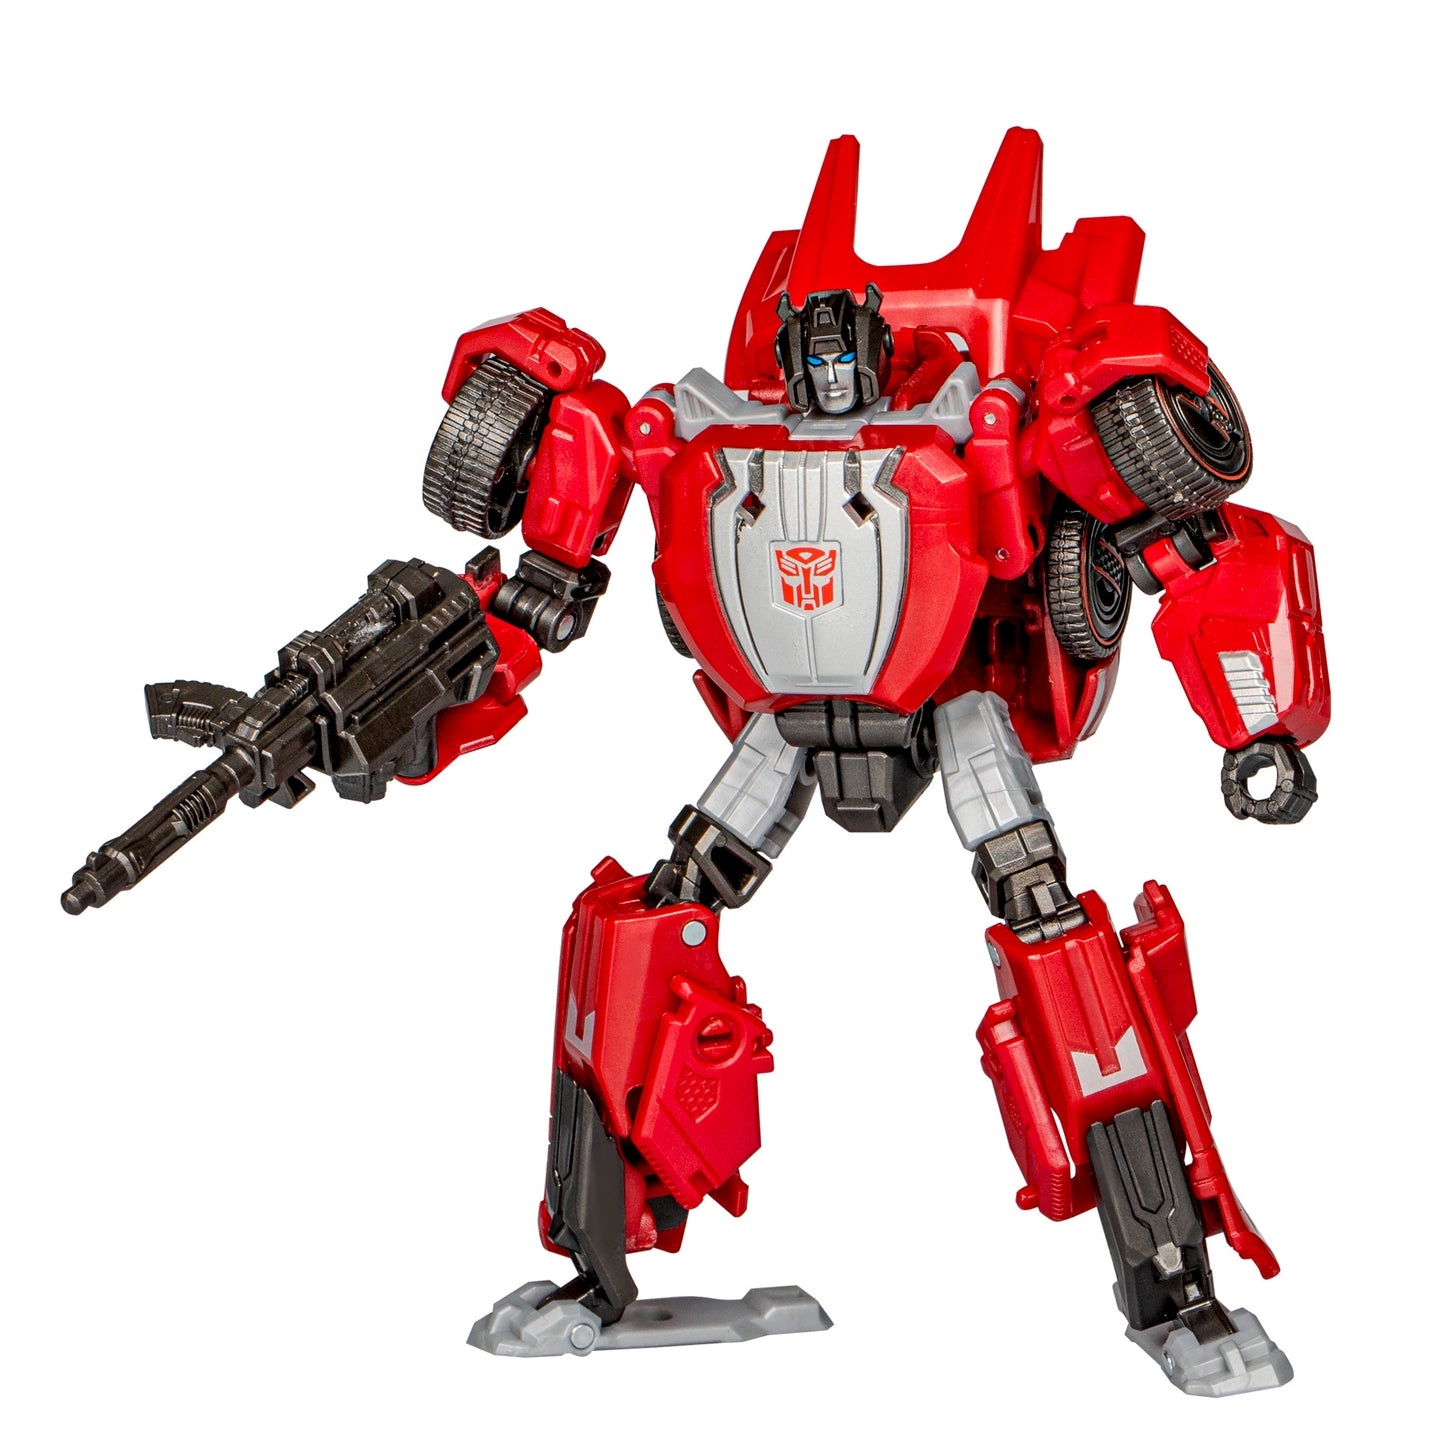 Transformers Studio Series Deluxe Transformers: War for Cybertron 07 Gamer Edition Sideswipe Action Figure